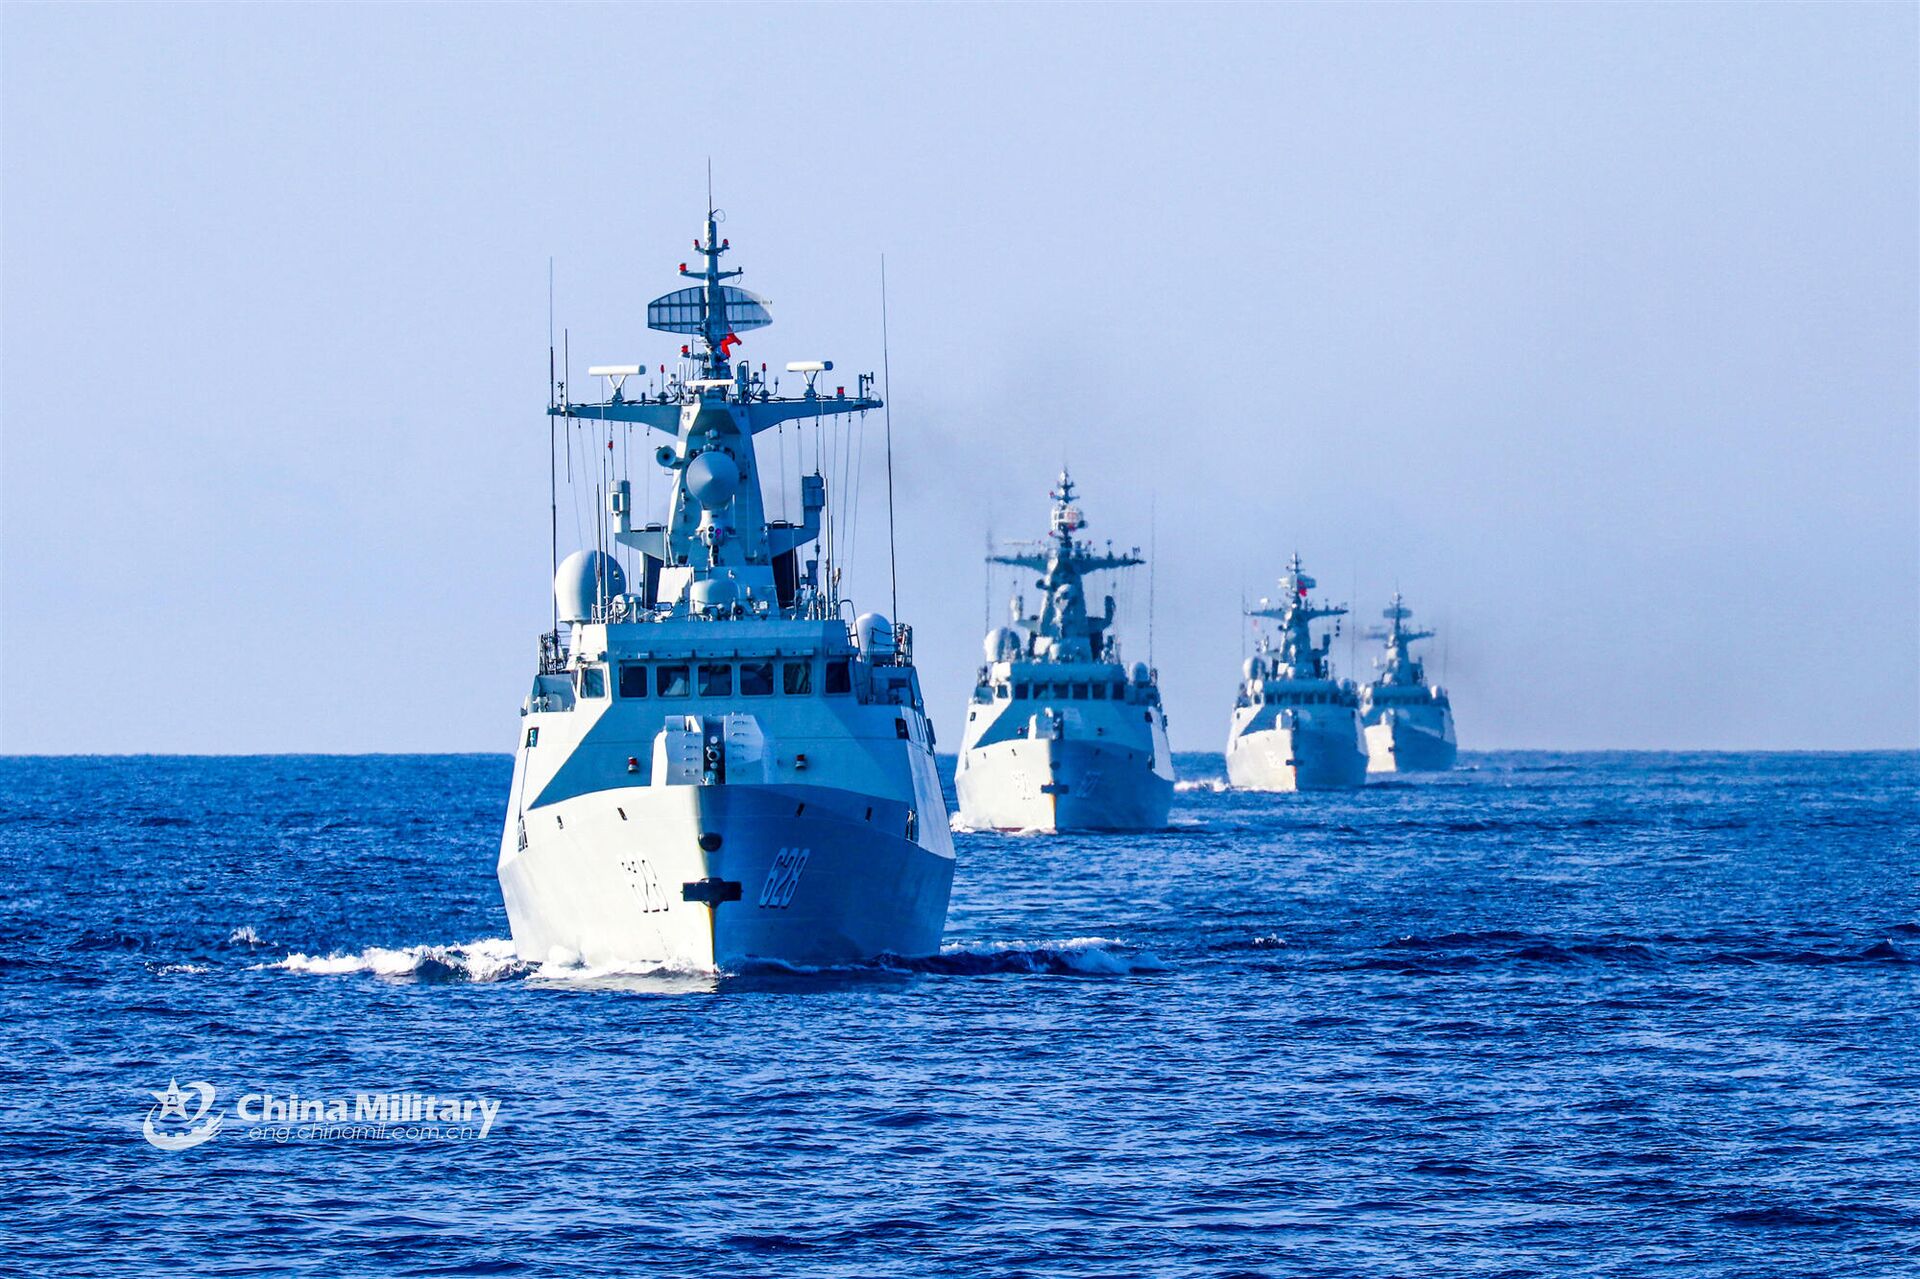 The frigate Enshi (Hull 627), Yongzhou (Hull 628), Bazhong (Hull 625), and Wuzhou (Hull 626) steam in formation during a 9-day maritime training exercise in waters of the South China Sea in late November, 2020. They are attached to a frigate flotilla of the navy under the PLA Southern Theater Command. - Sputnik International, 1920, 24.05.2022